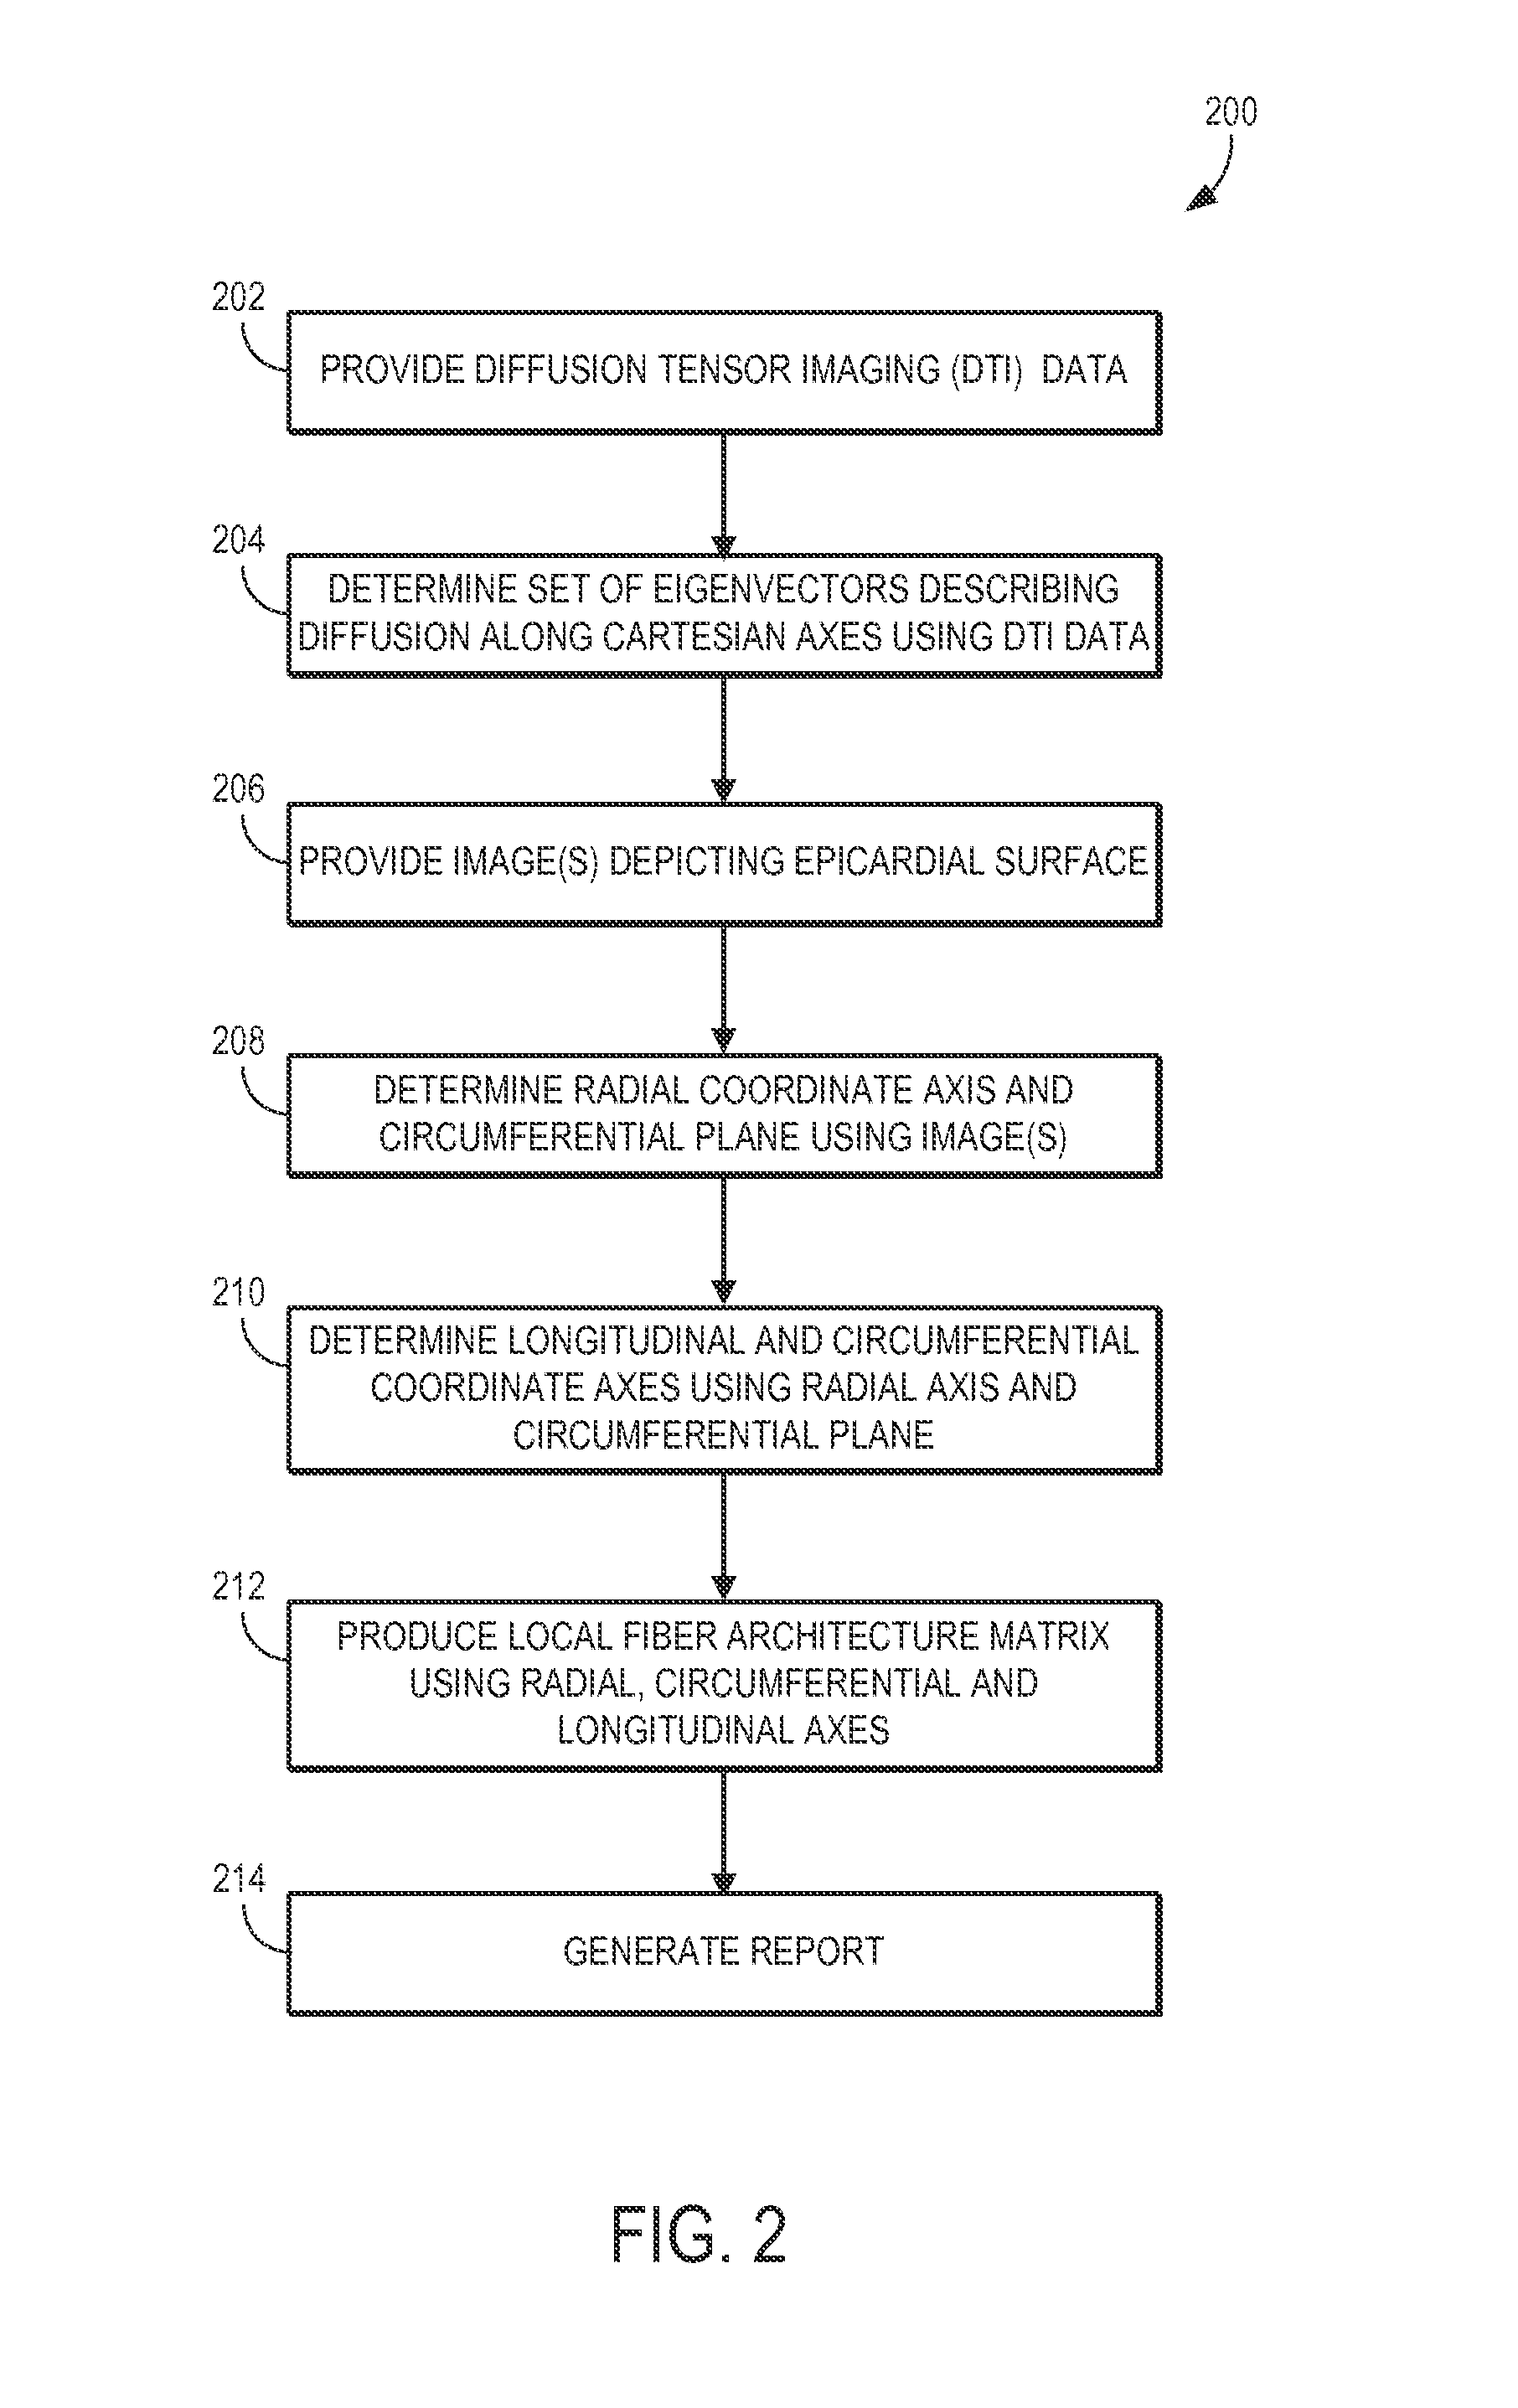 Mapping cardiac tissue architecture systems and methods